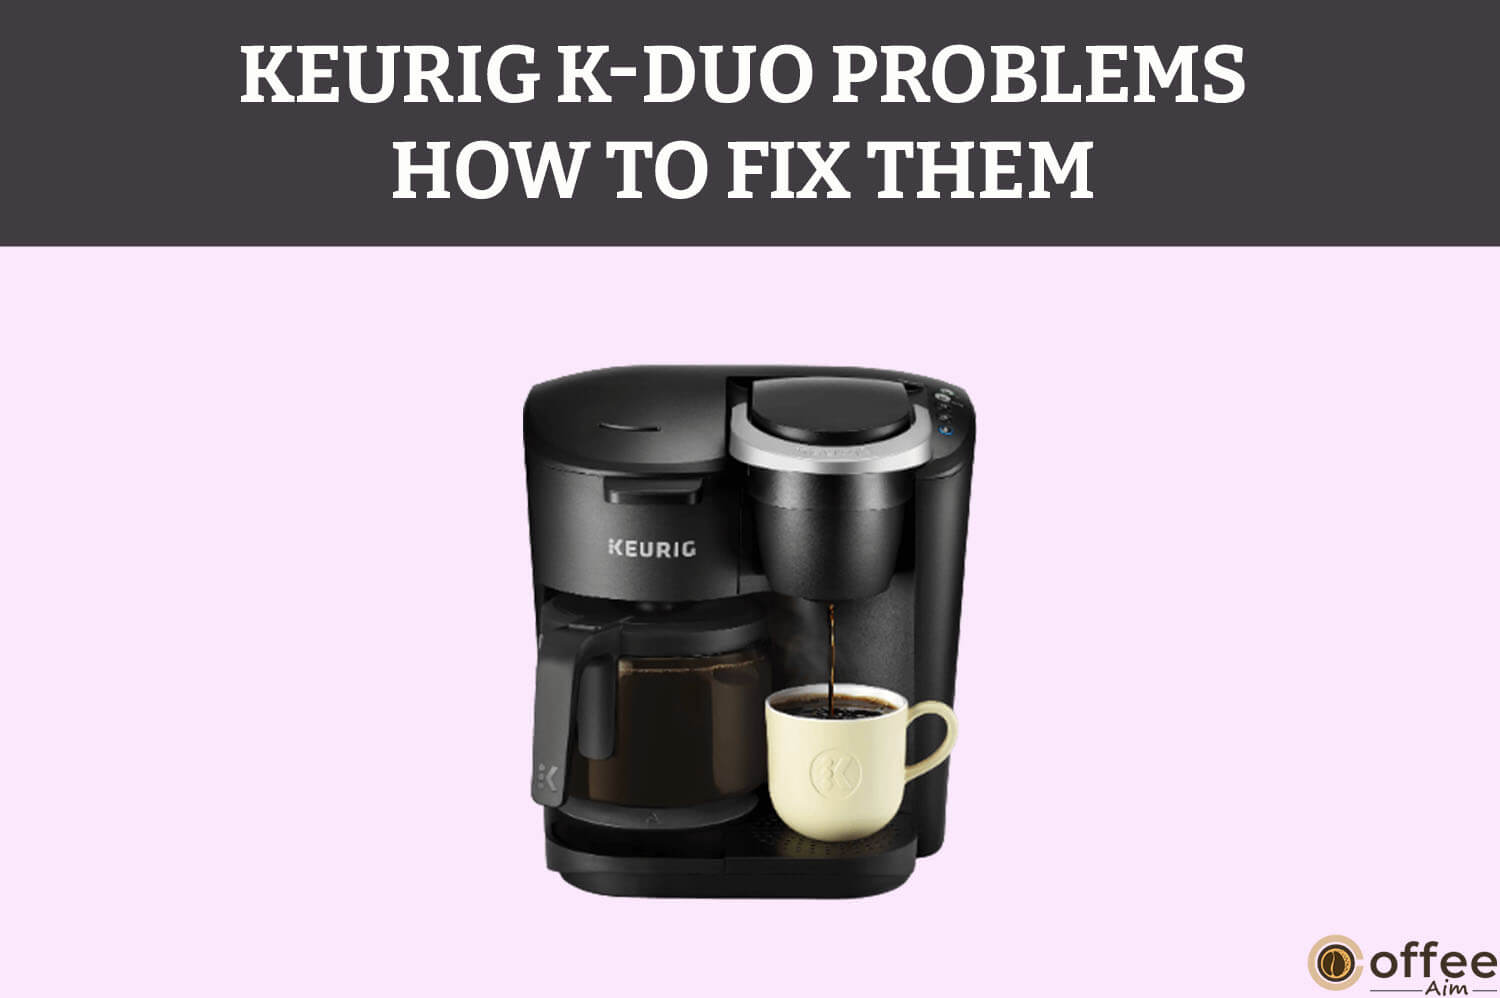 Featured image for the article "Keurig K-Duo Problems –How To Fix Them"